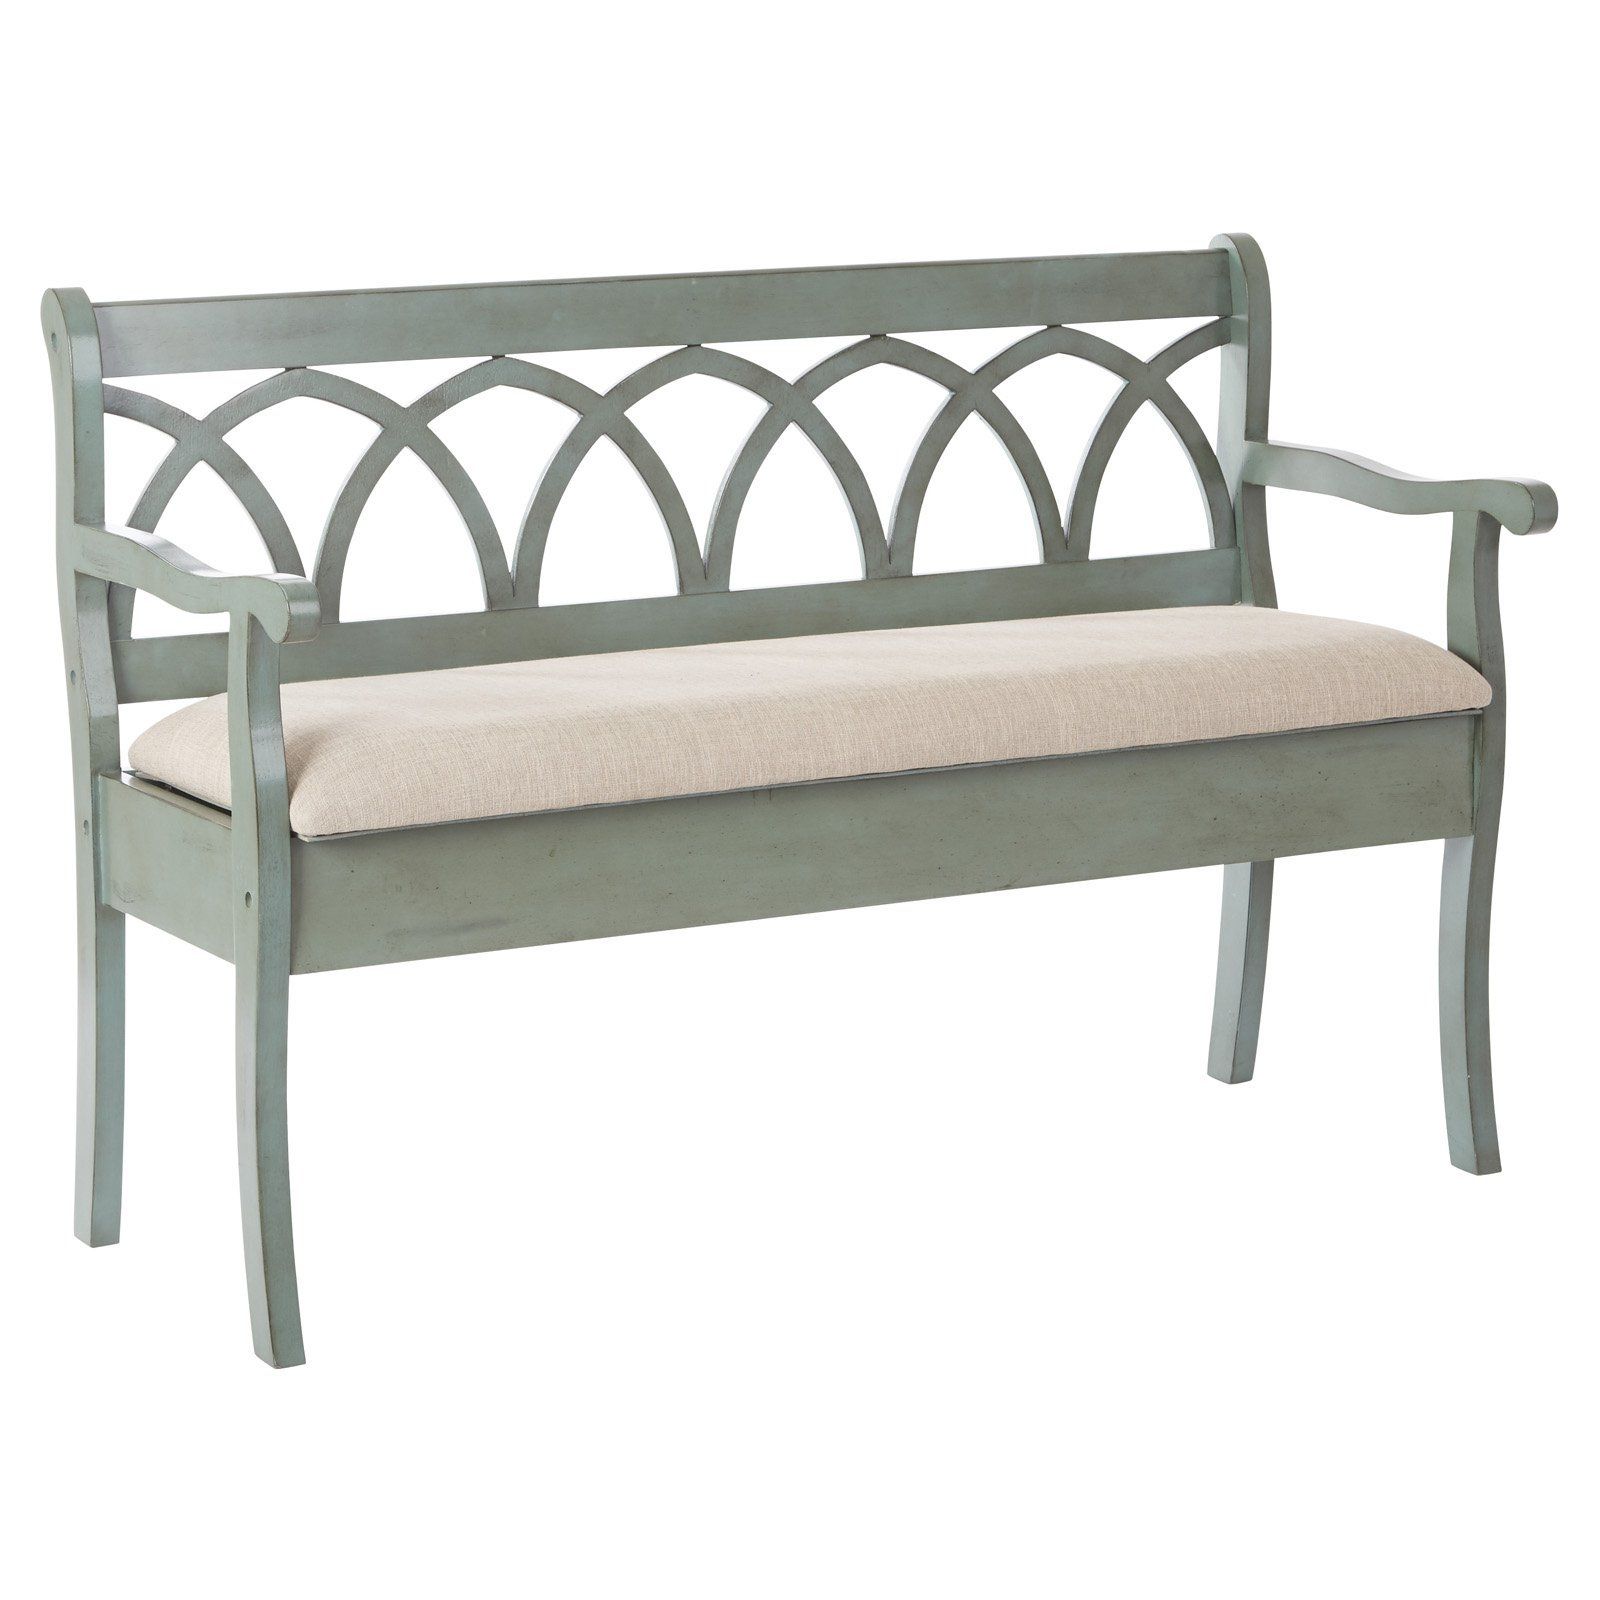 OSP Home Furnishings Coventry Storage Bench in Antique Sage Frame and Beige Seat Cushion K/D | Walmart (US)